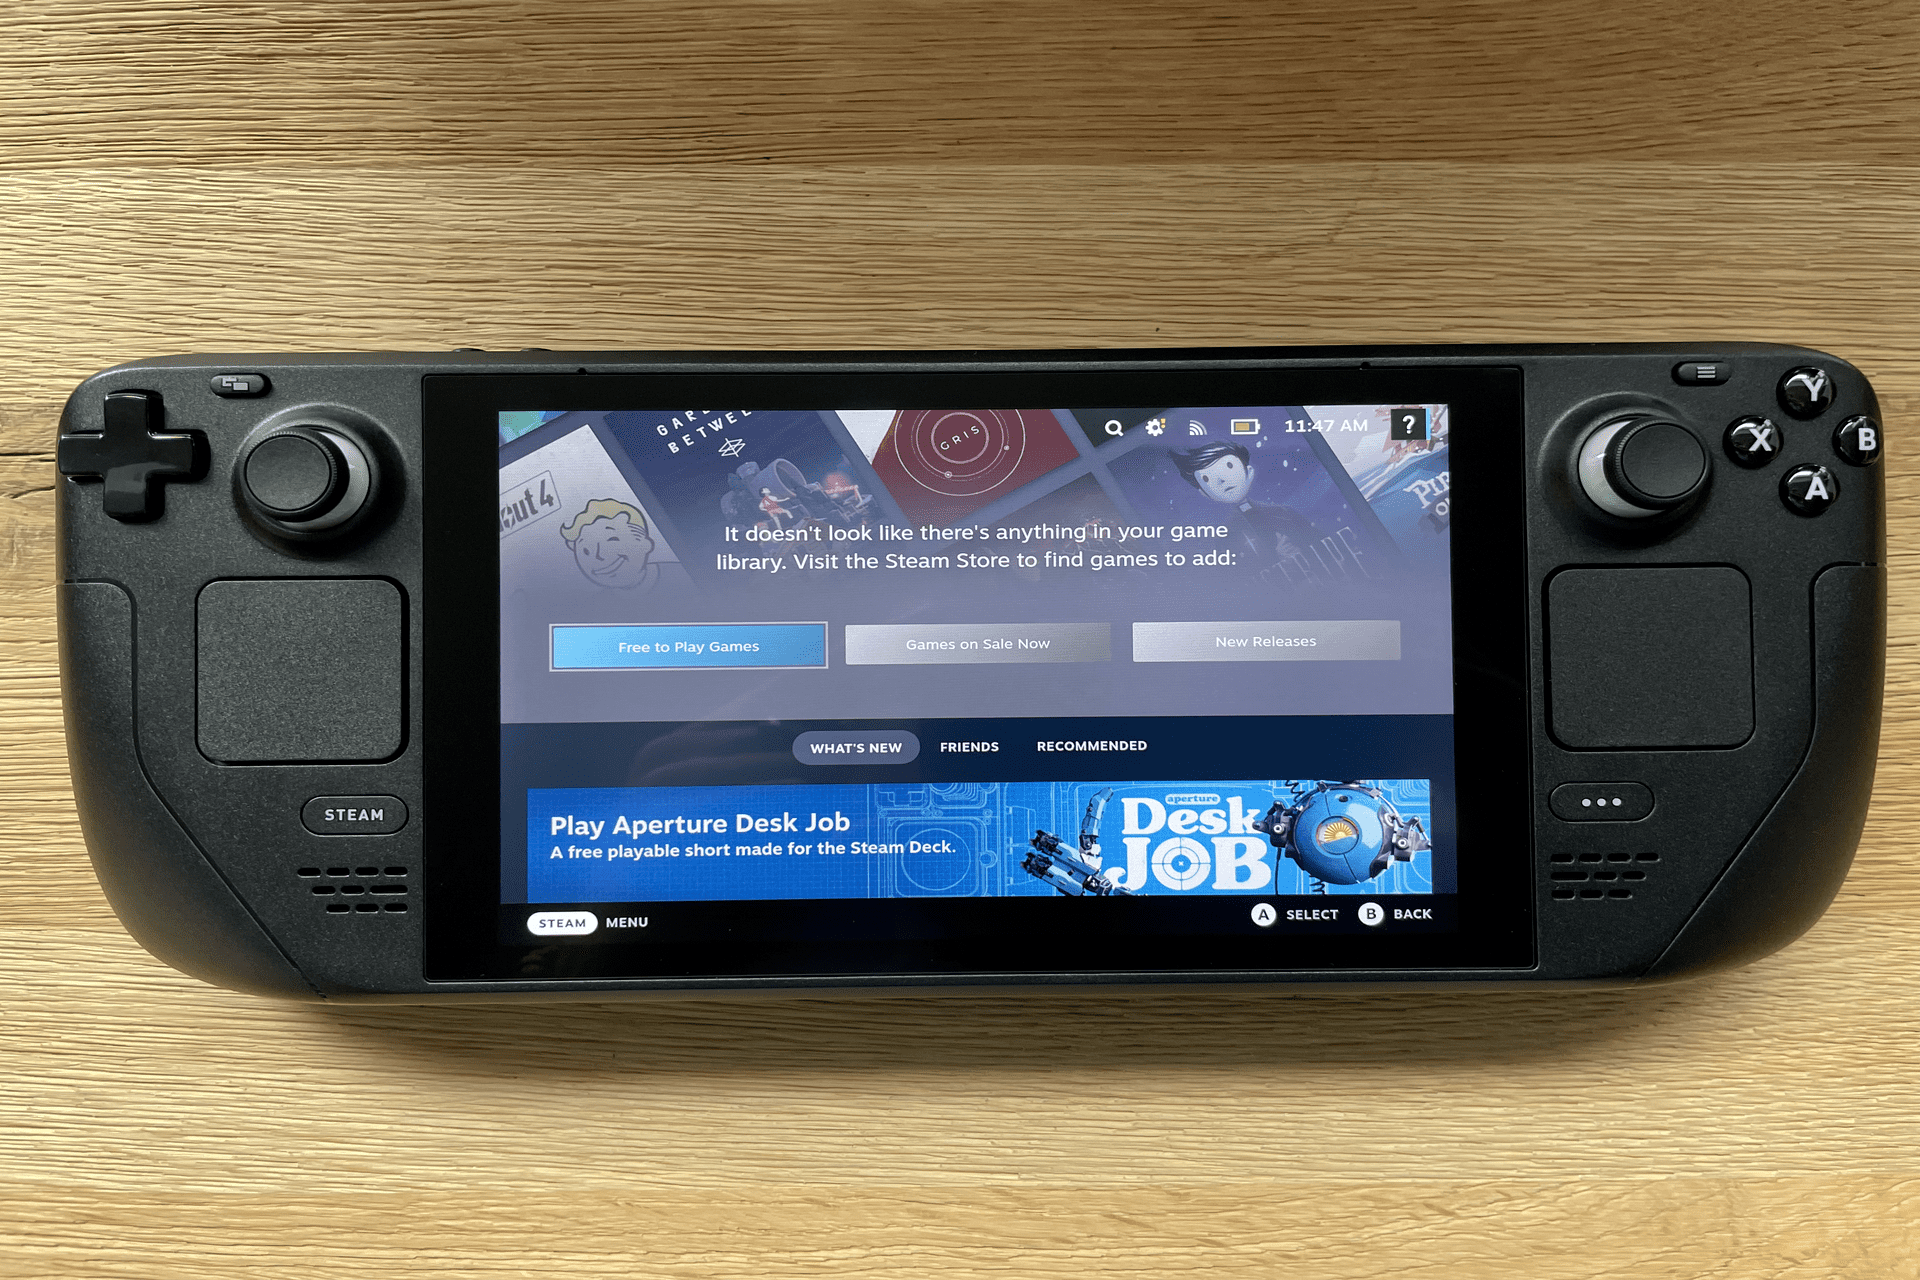 5 Best Nintendo Switch Emulators For PC, Steam Deck, & Android [2023]